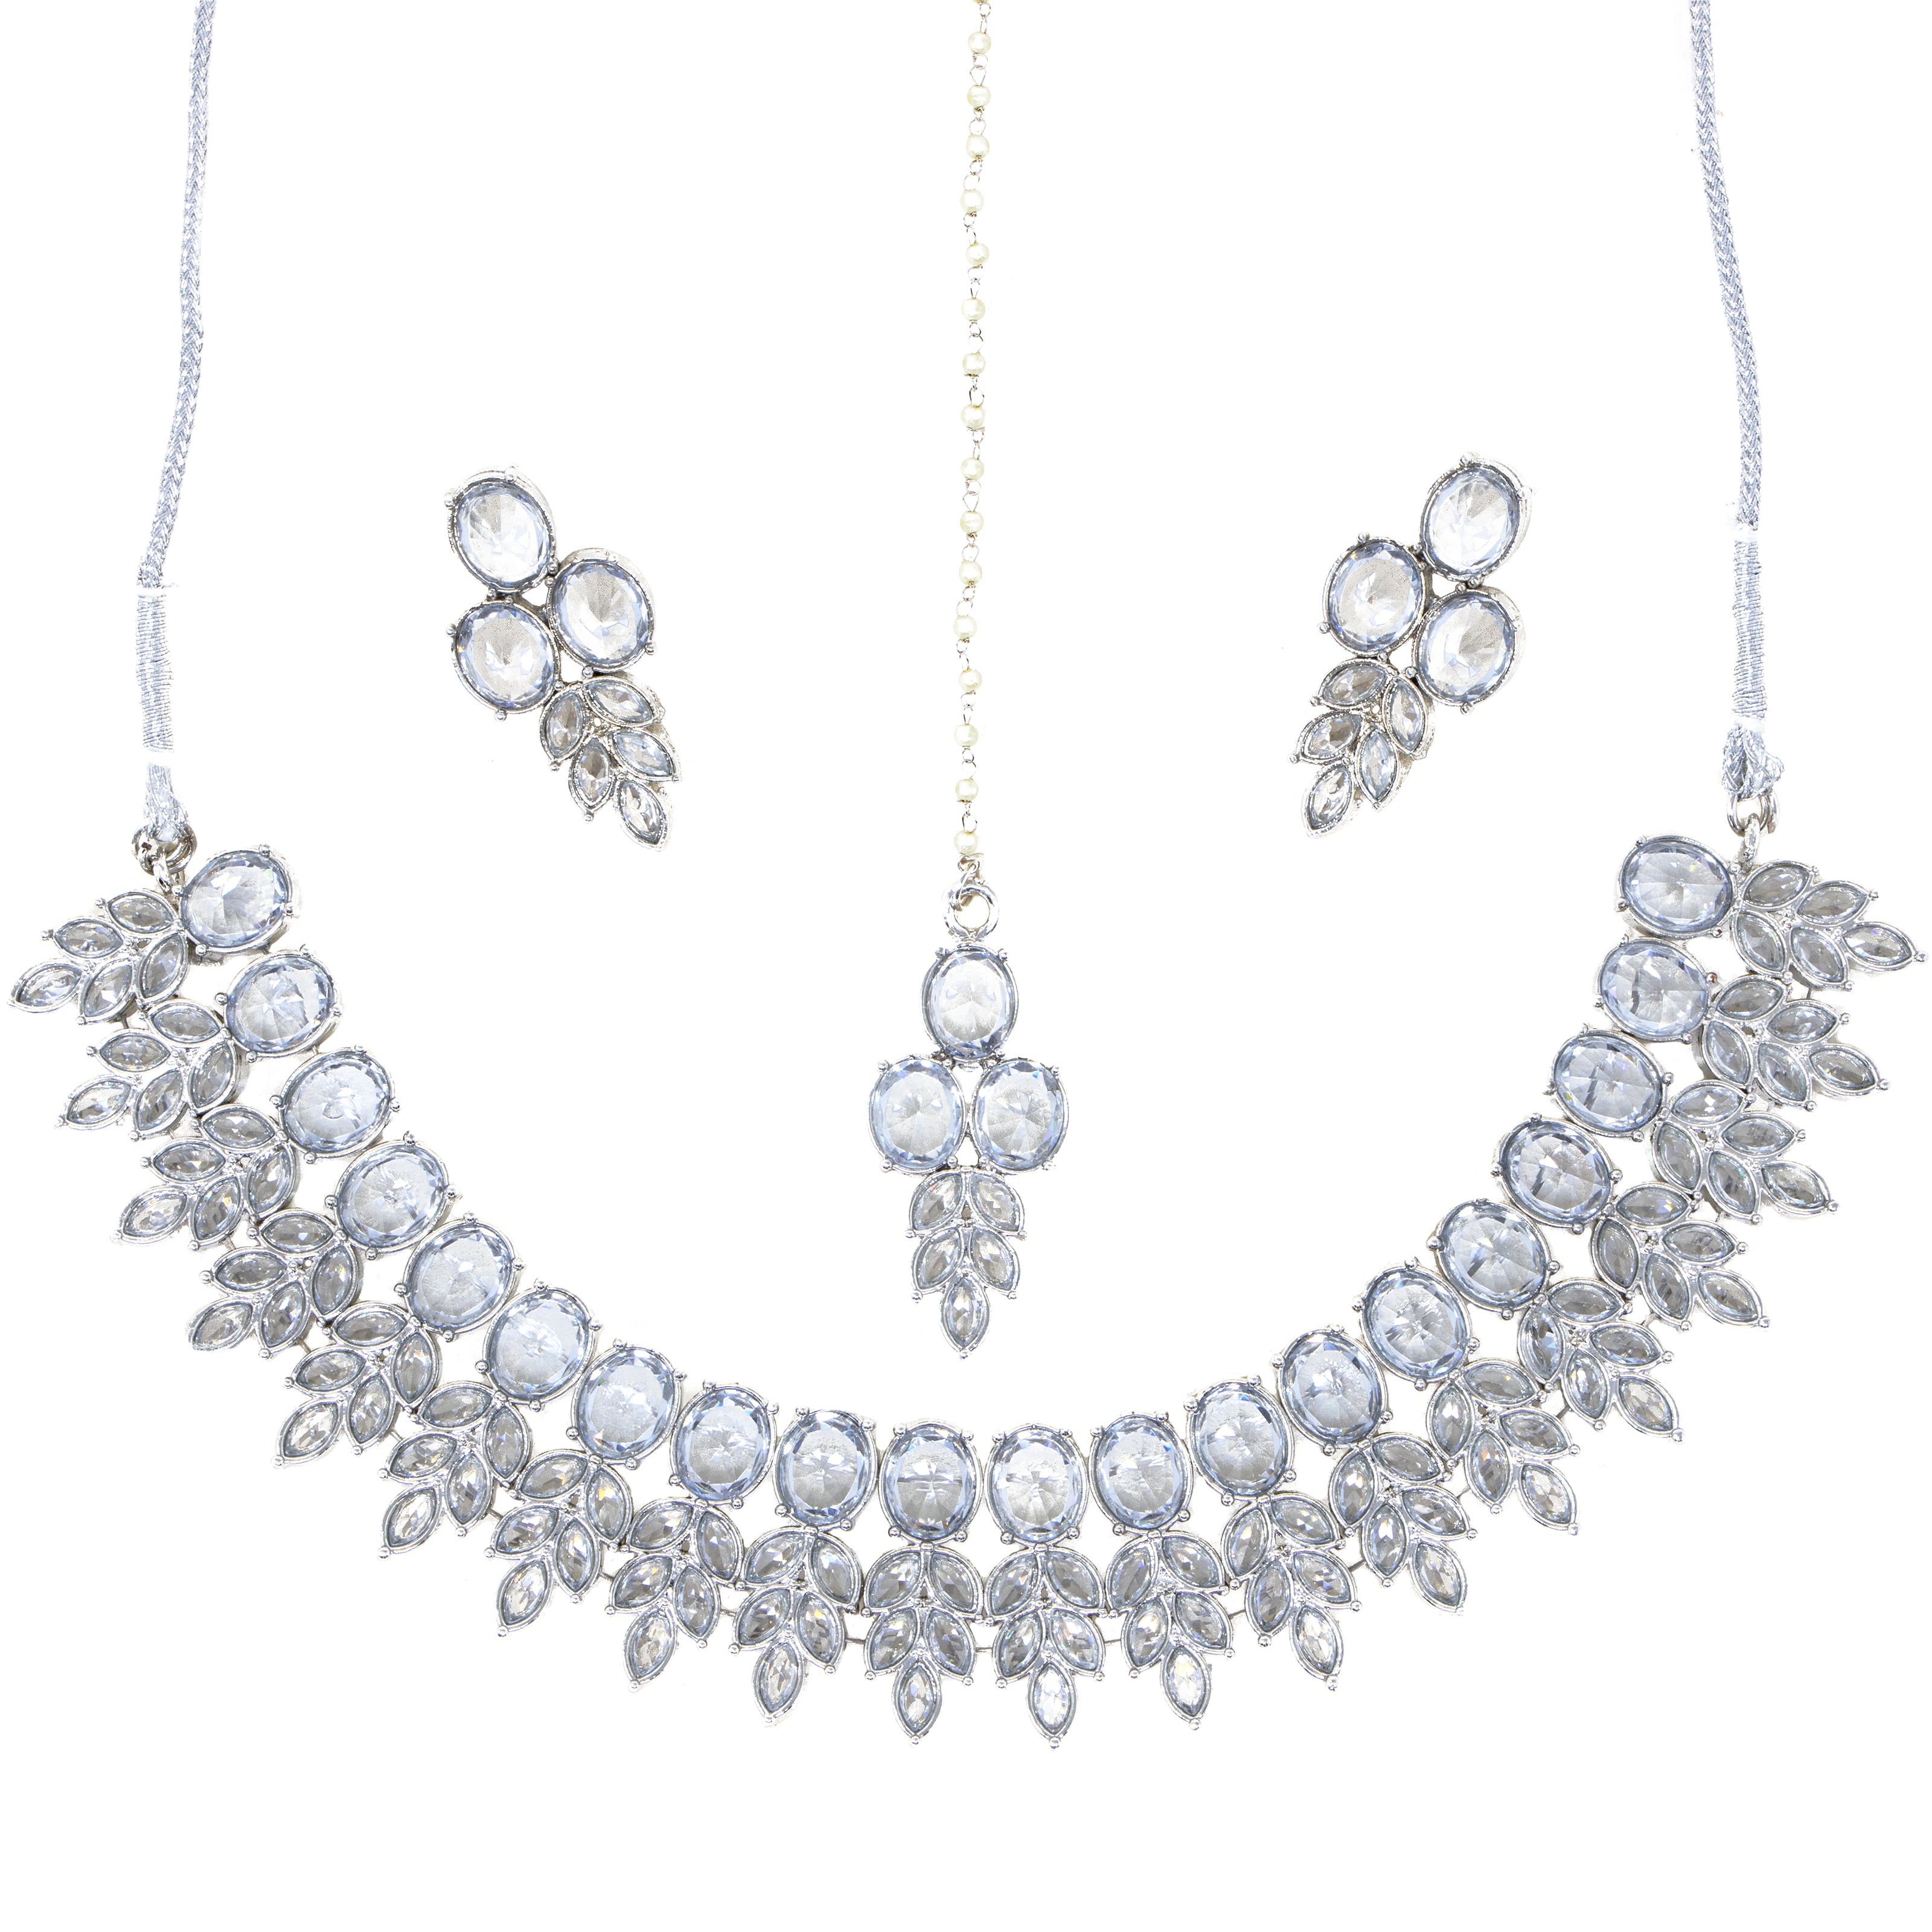 Silver 3 piece jewelry set- Necklace, earrings,& bindi with clear crystals and stones